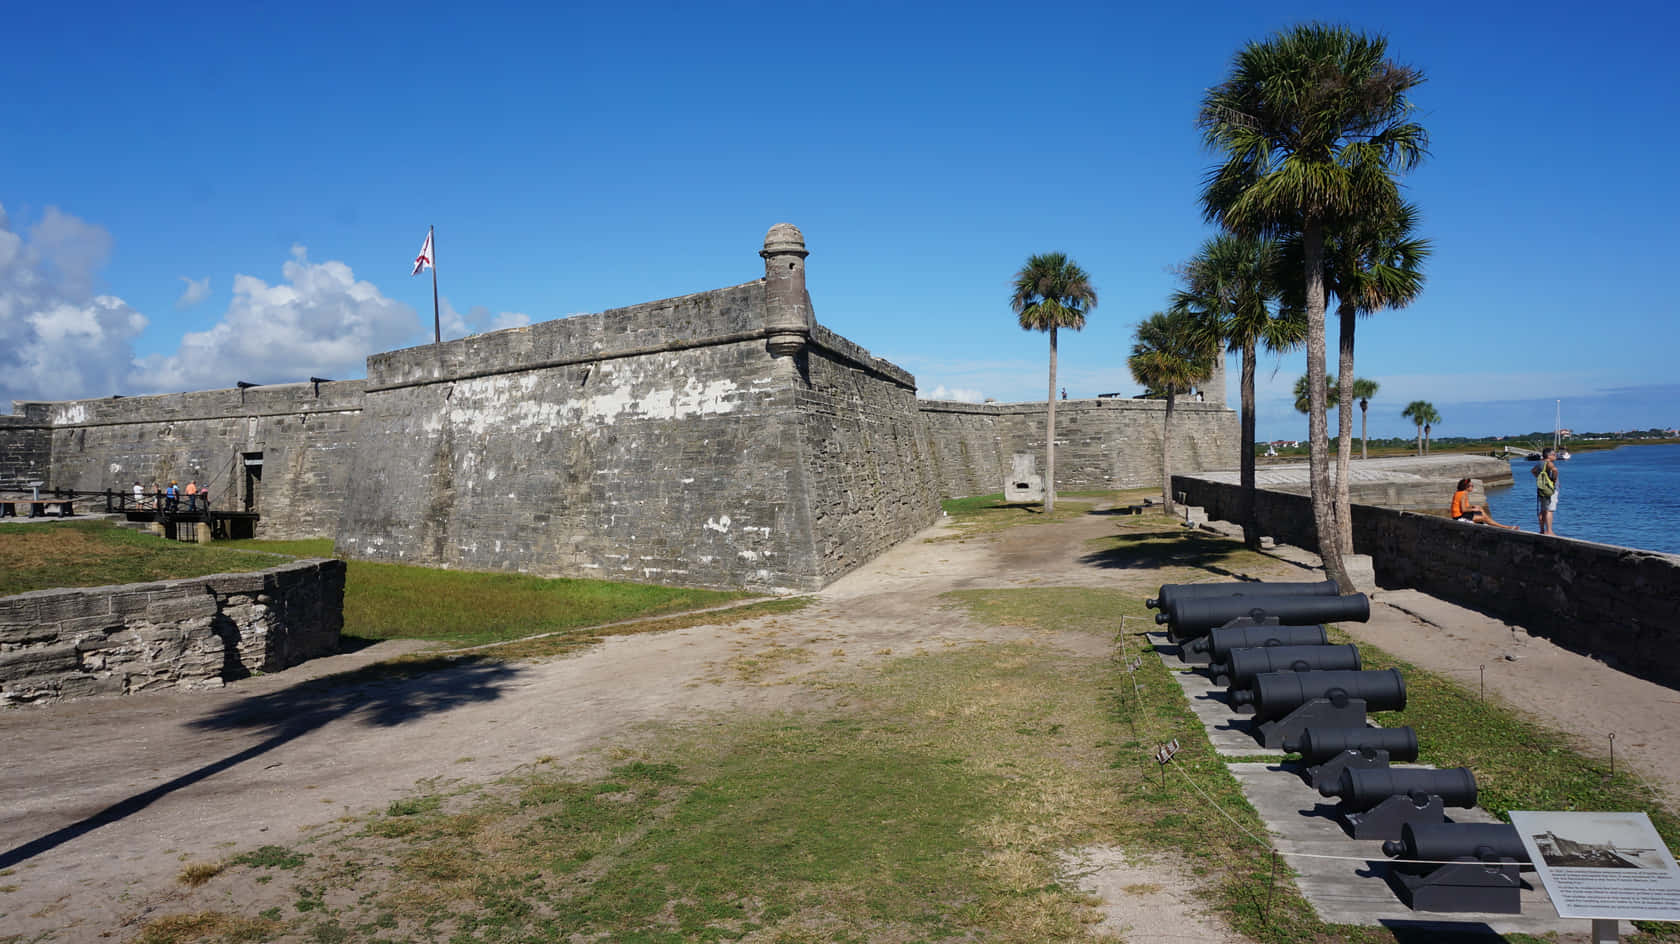 A Fort With Cannons And Palm Trees